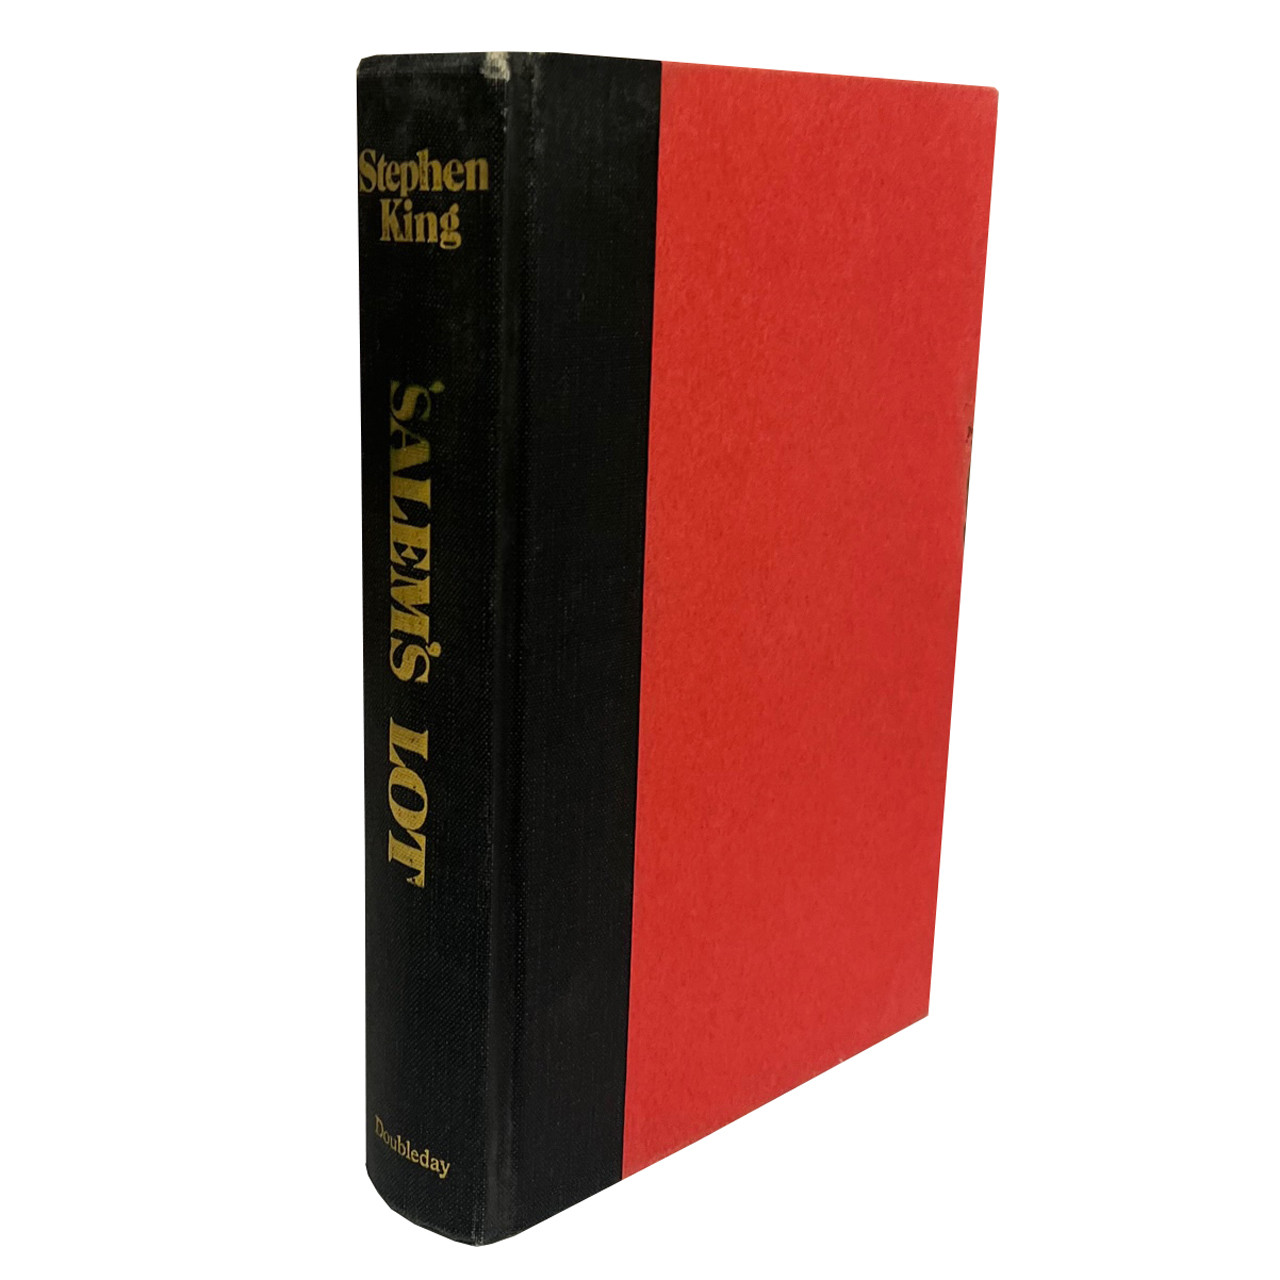 Stephen King "Salem's Lot" Slipcased First Edition, Second State DJ "Father Cody" Q37 Code [NF/Good]